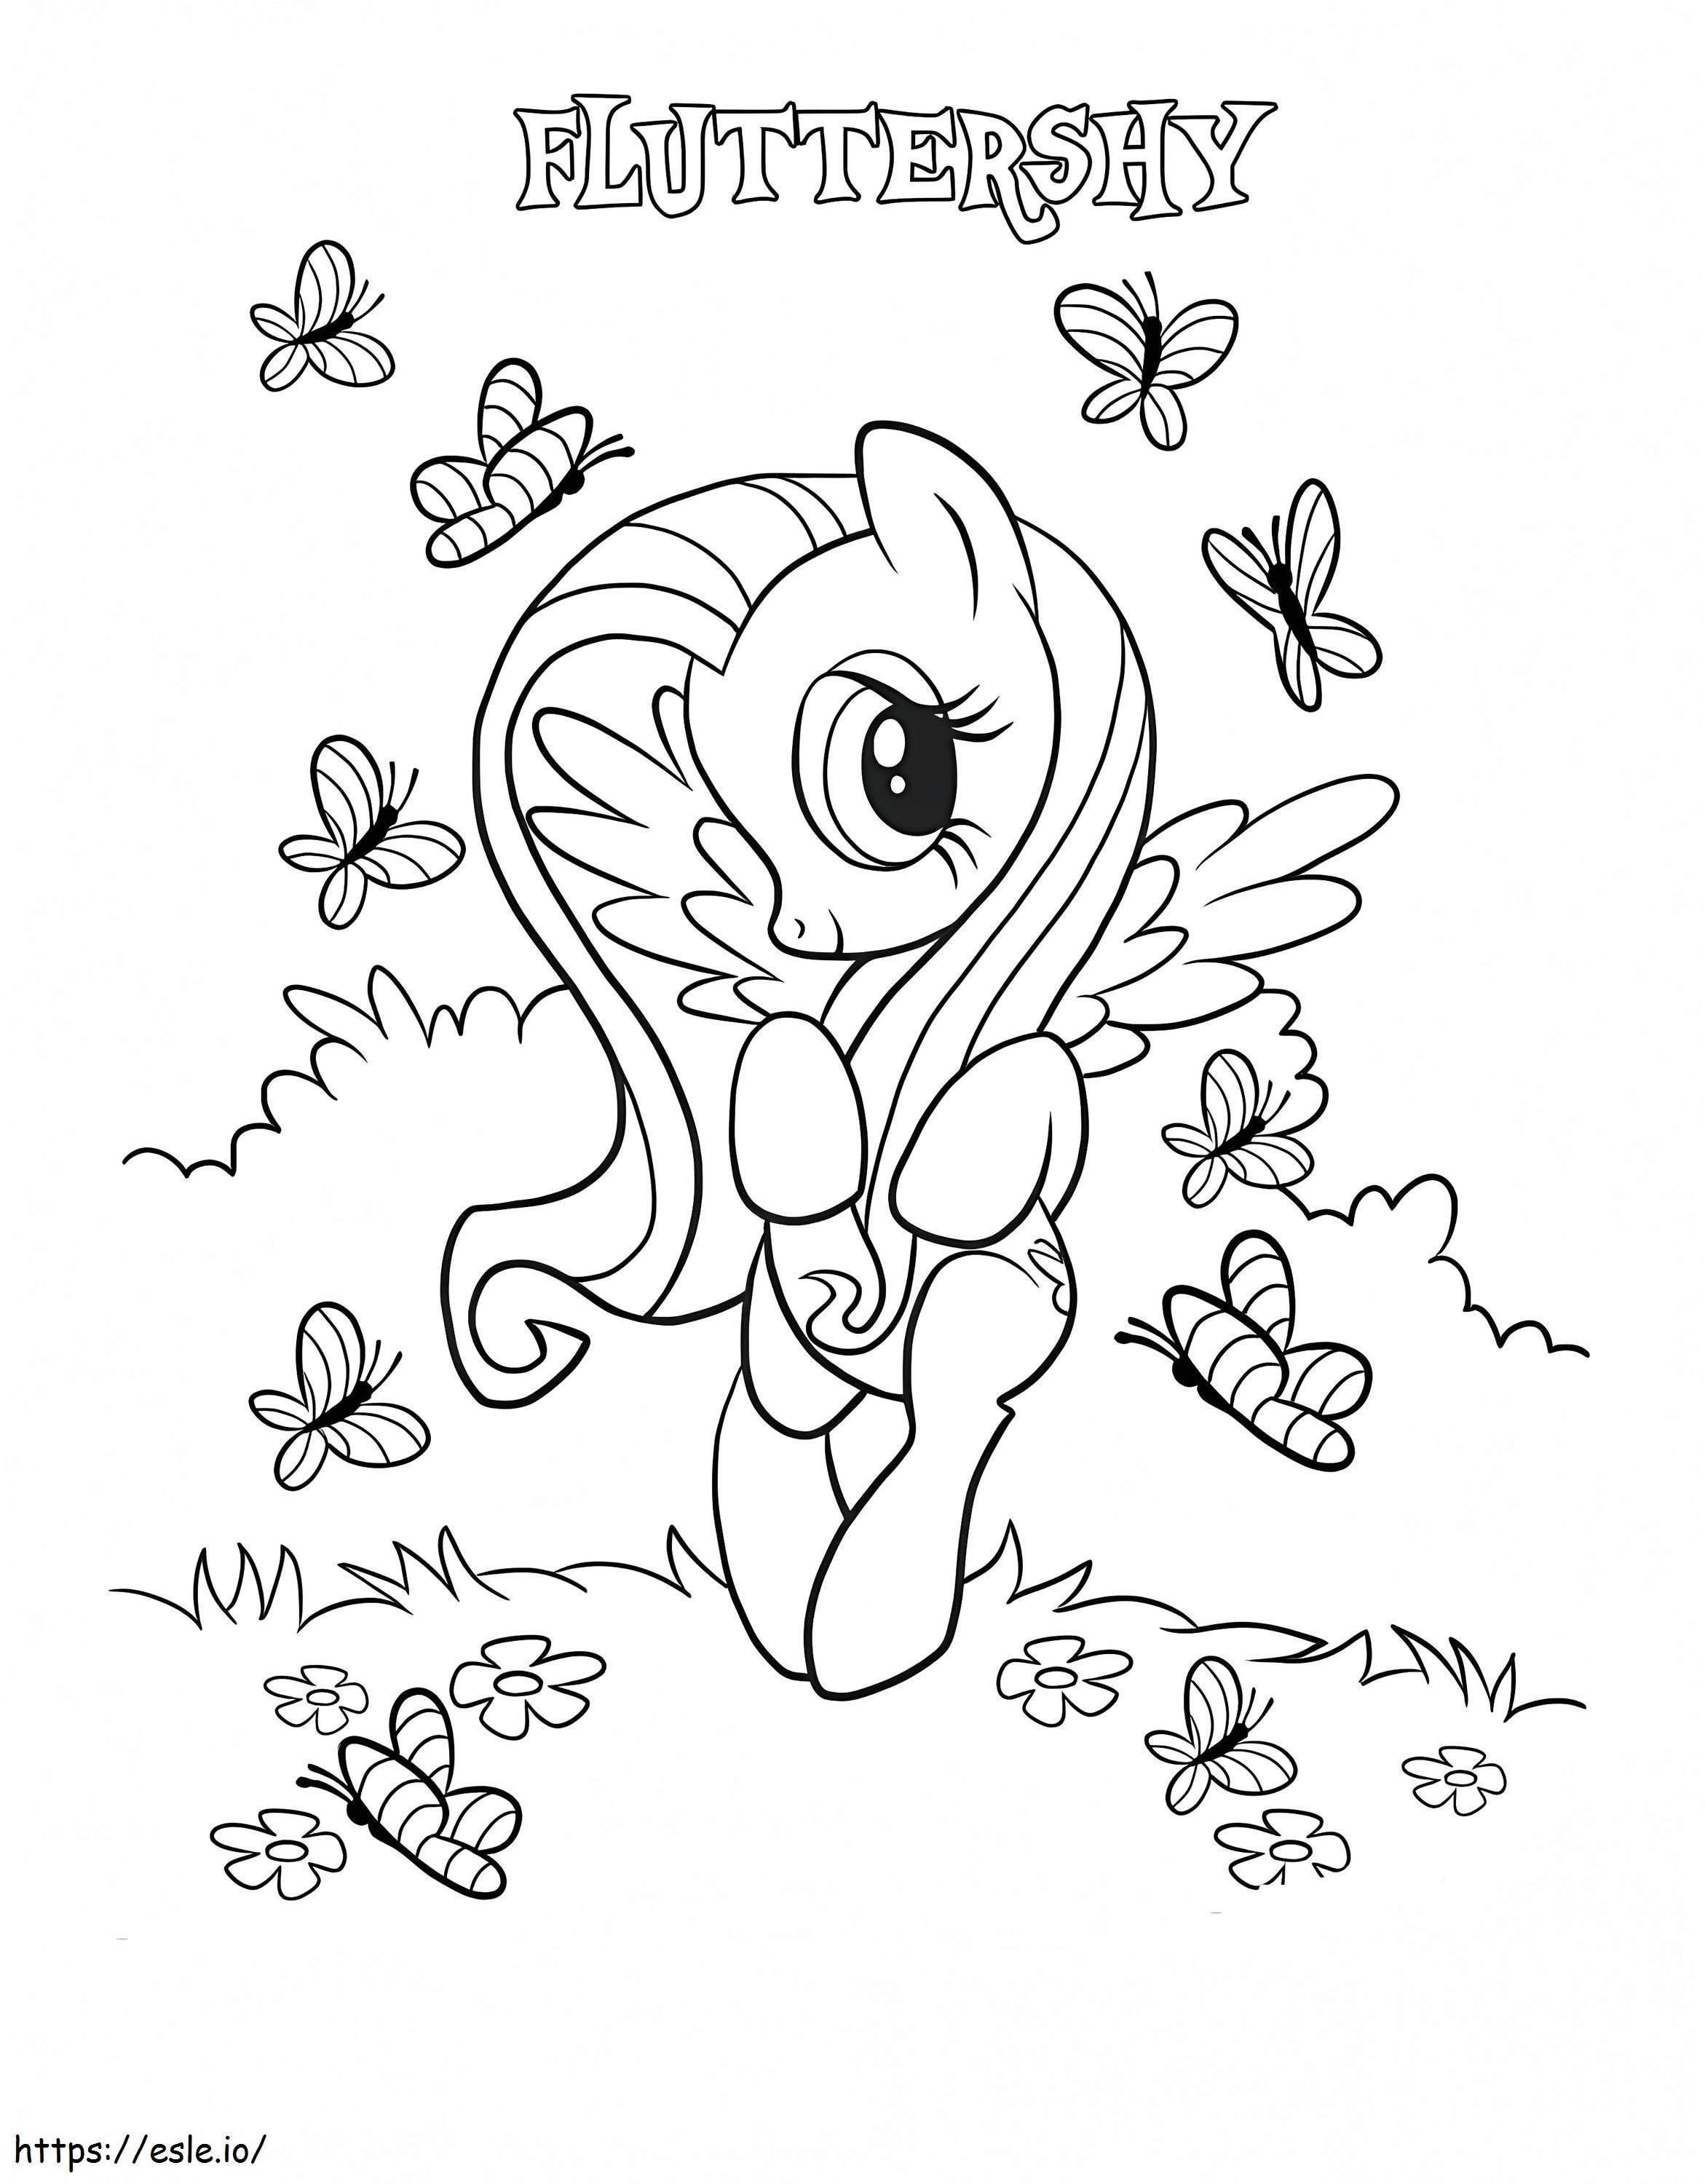 Fluttershy 2 coloring page